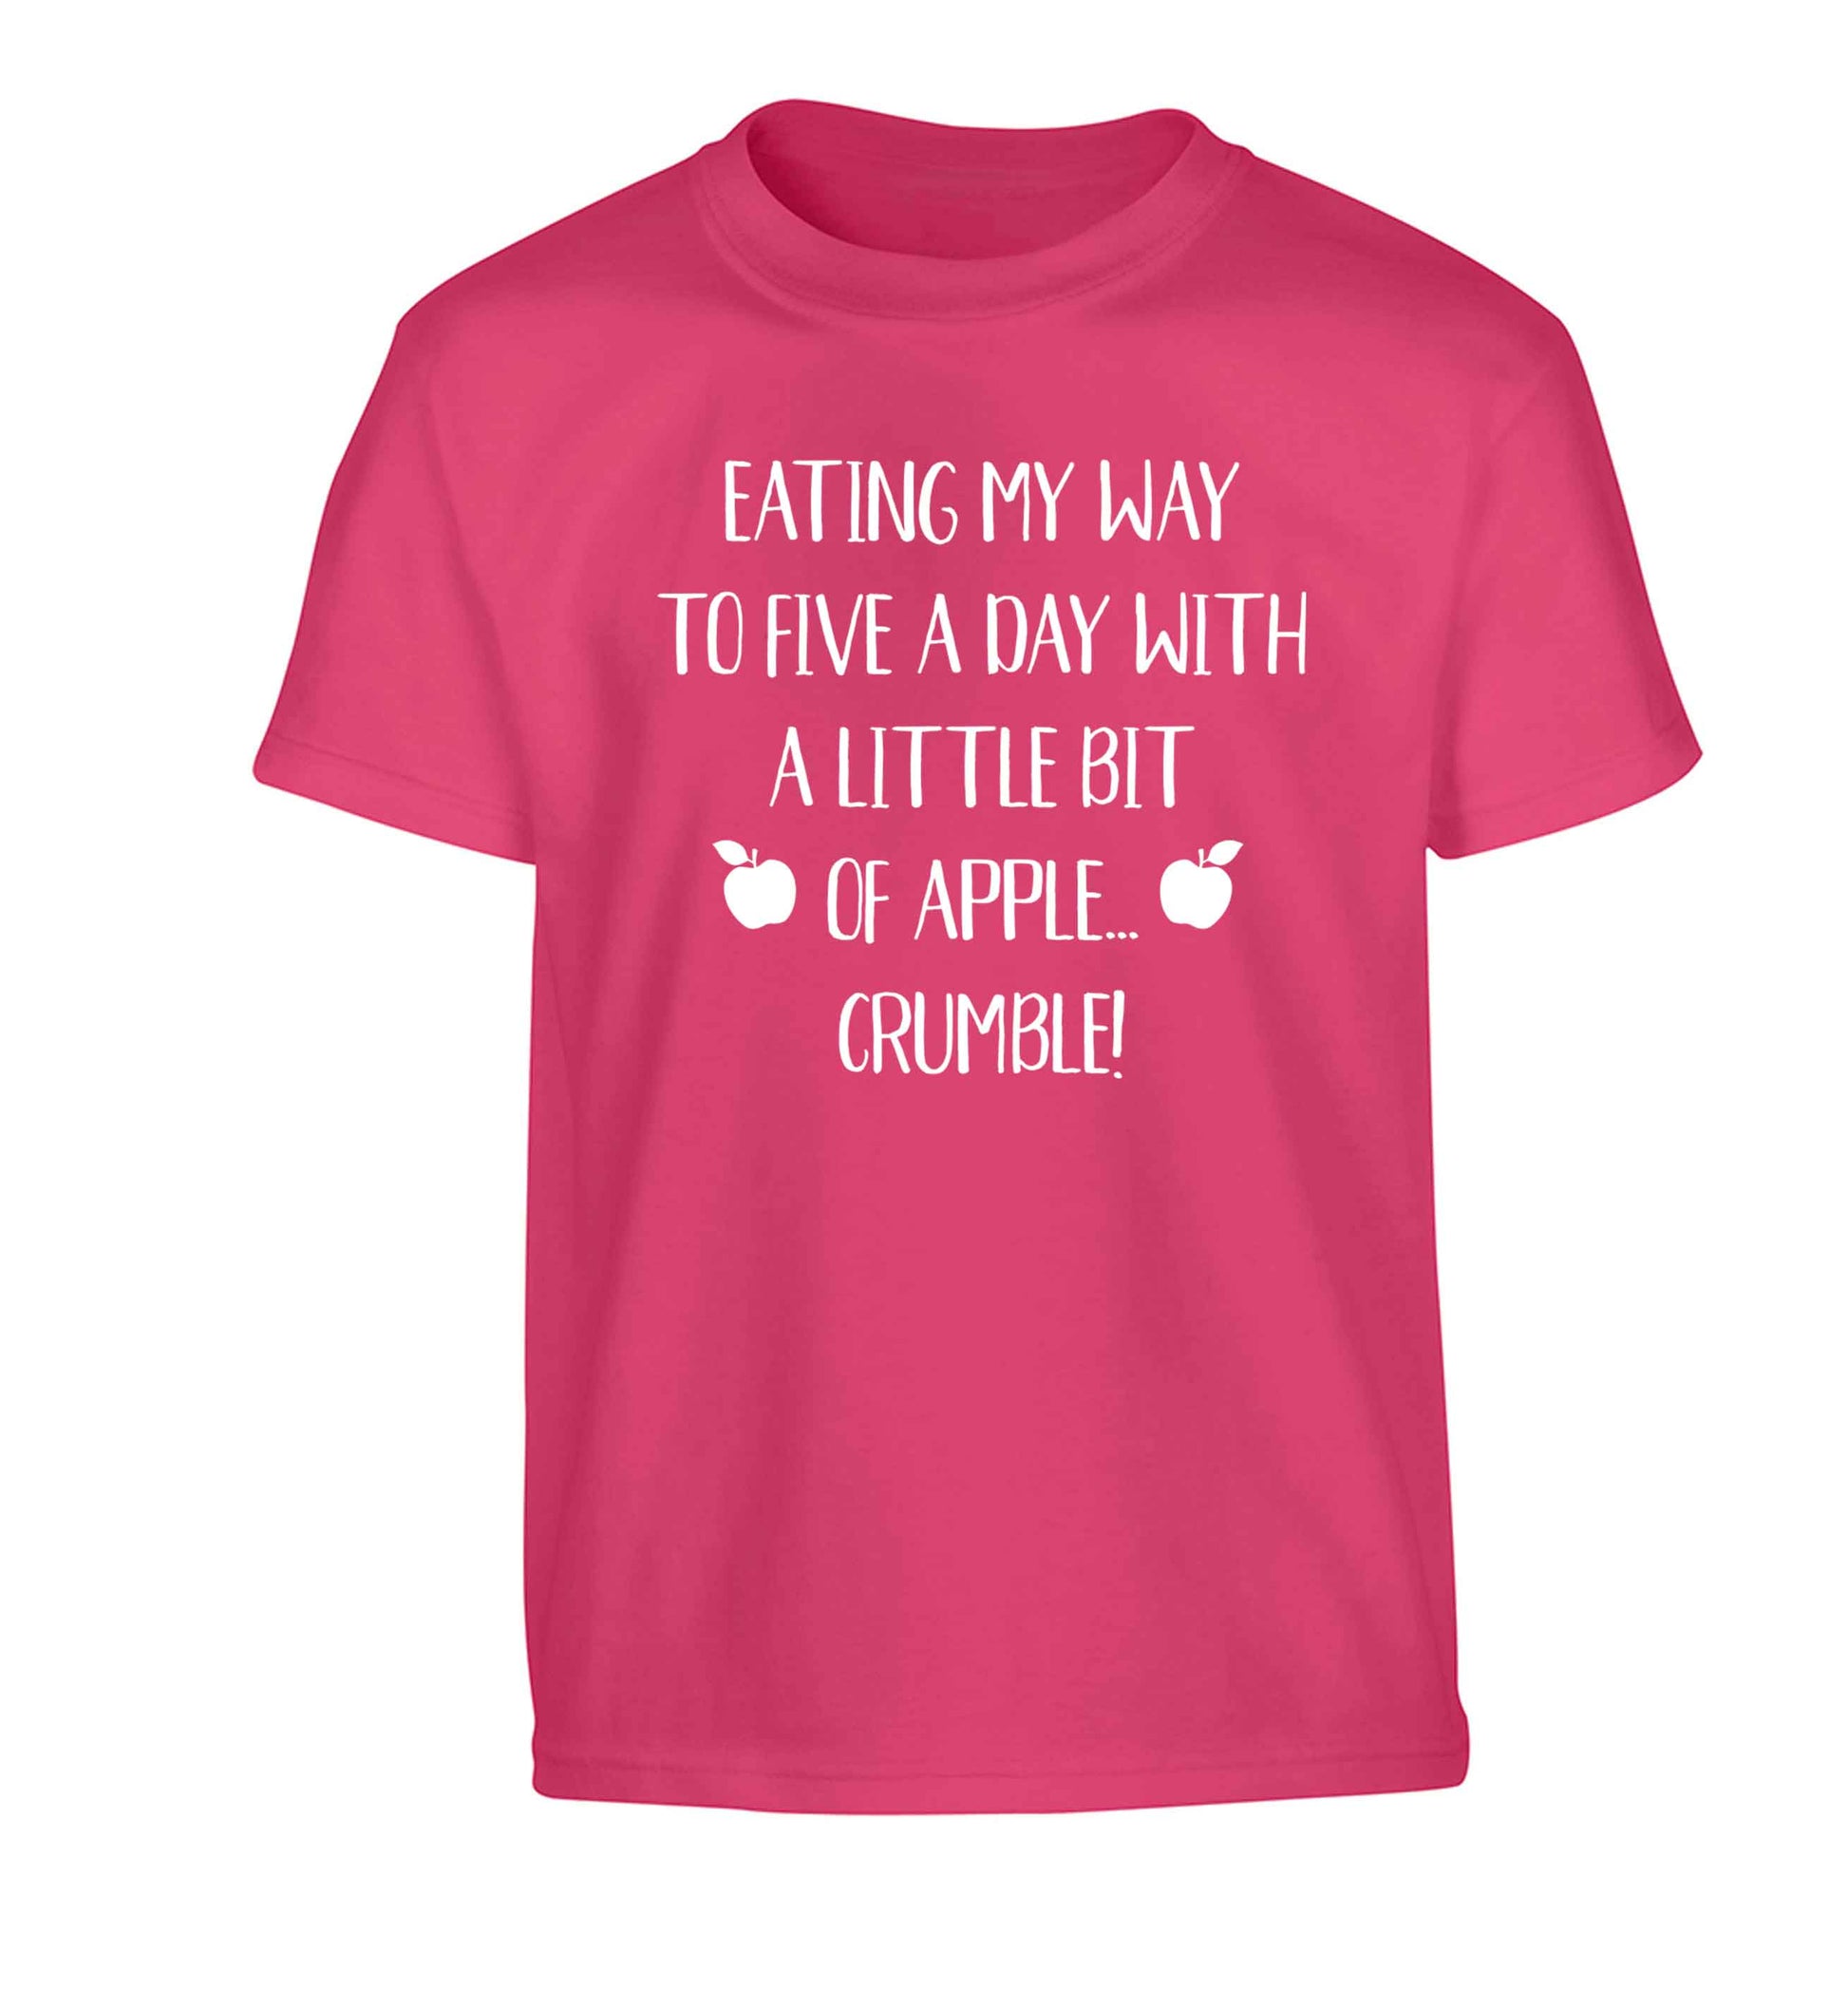 Eating my way to five a day with a little bit of apple crumble Children's pink Tshirt 12-13 Years